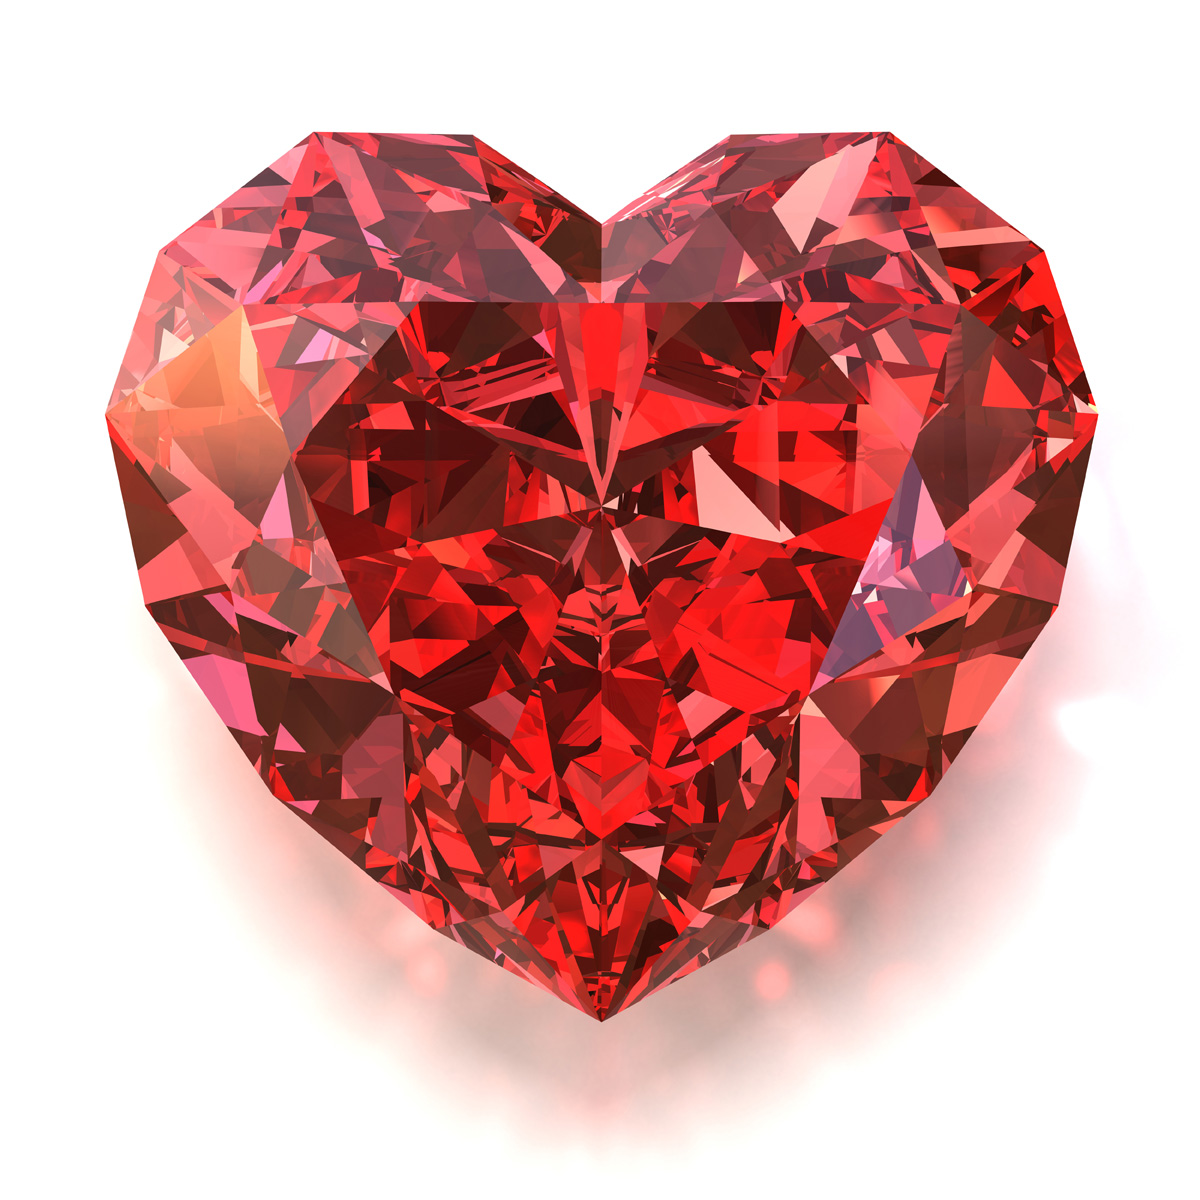 Bright Red Heart-shaped Diamond - Ruby Red Heart - HD Wallpaper 